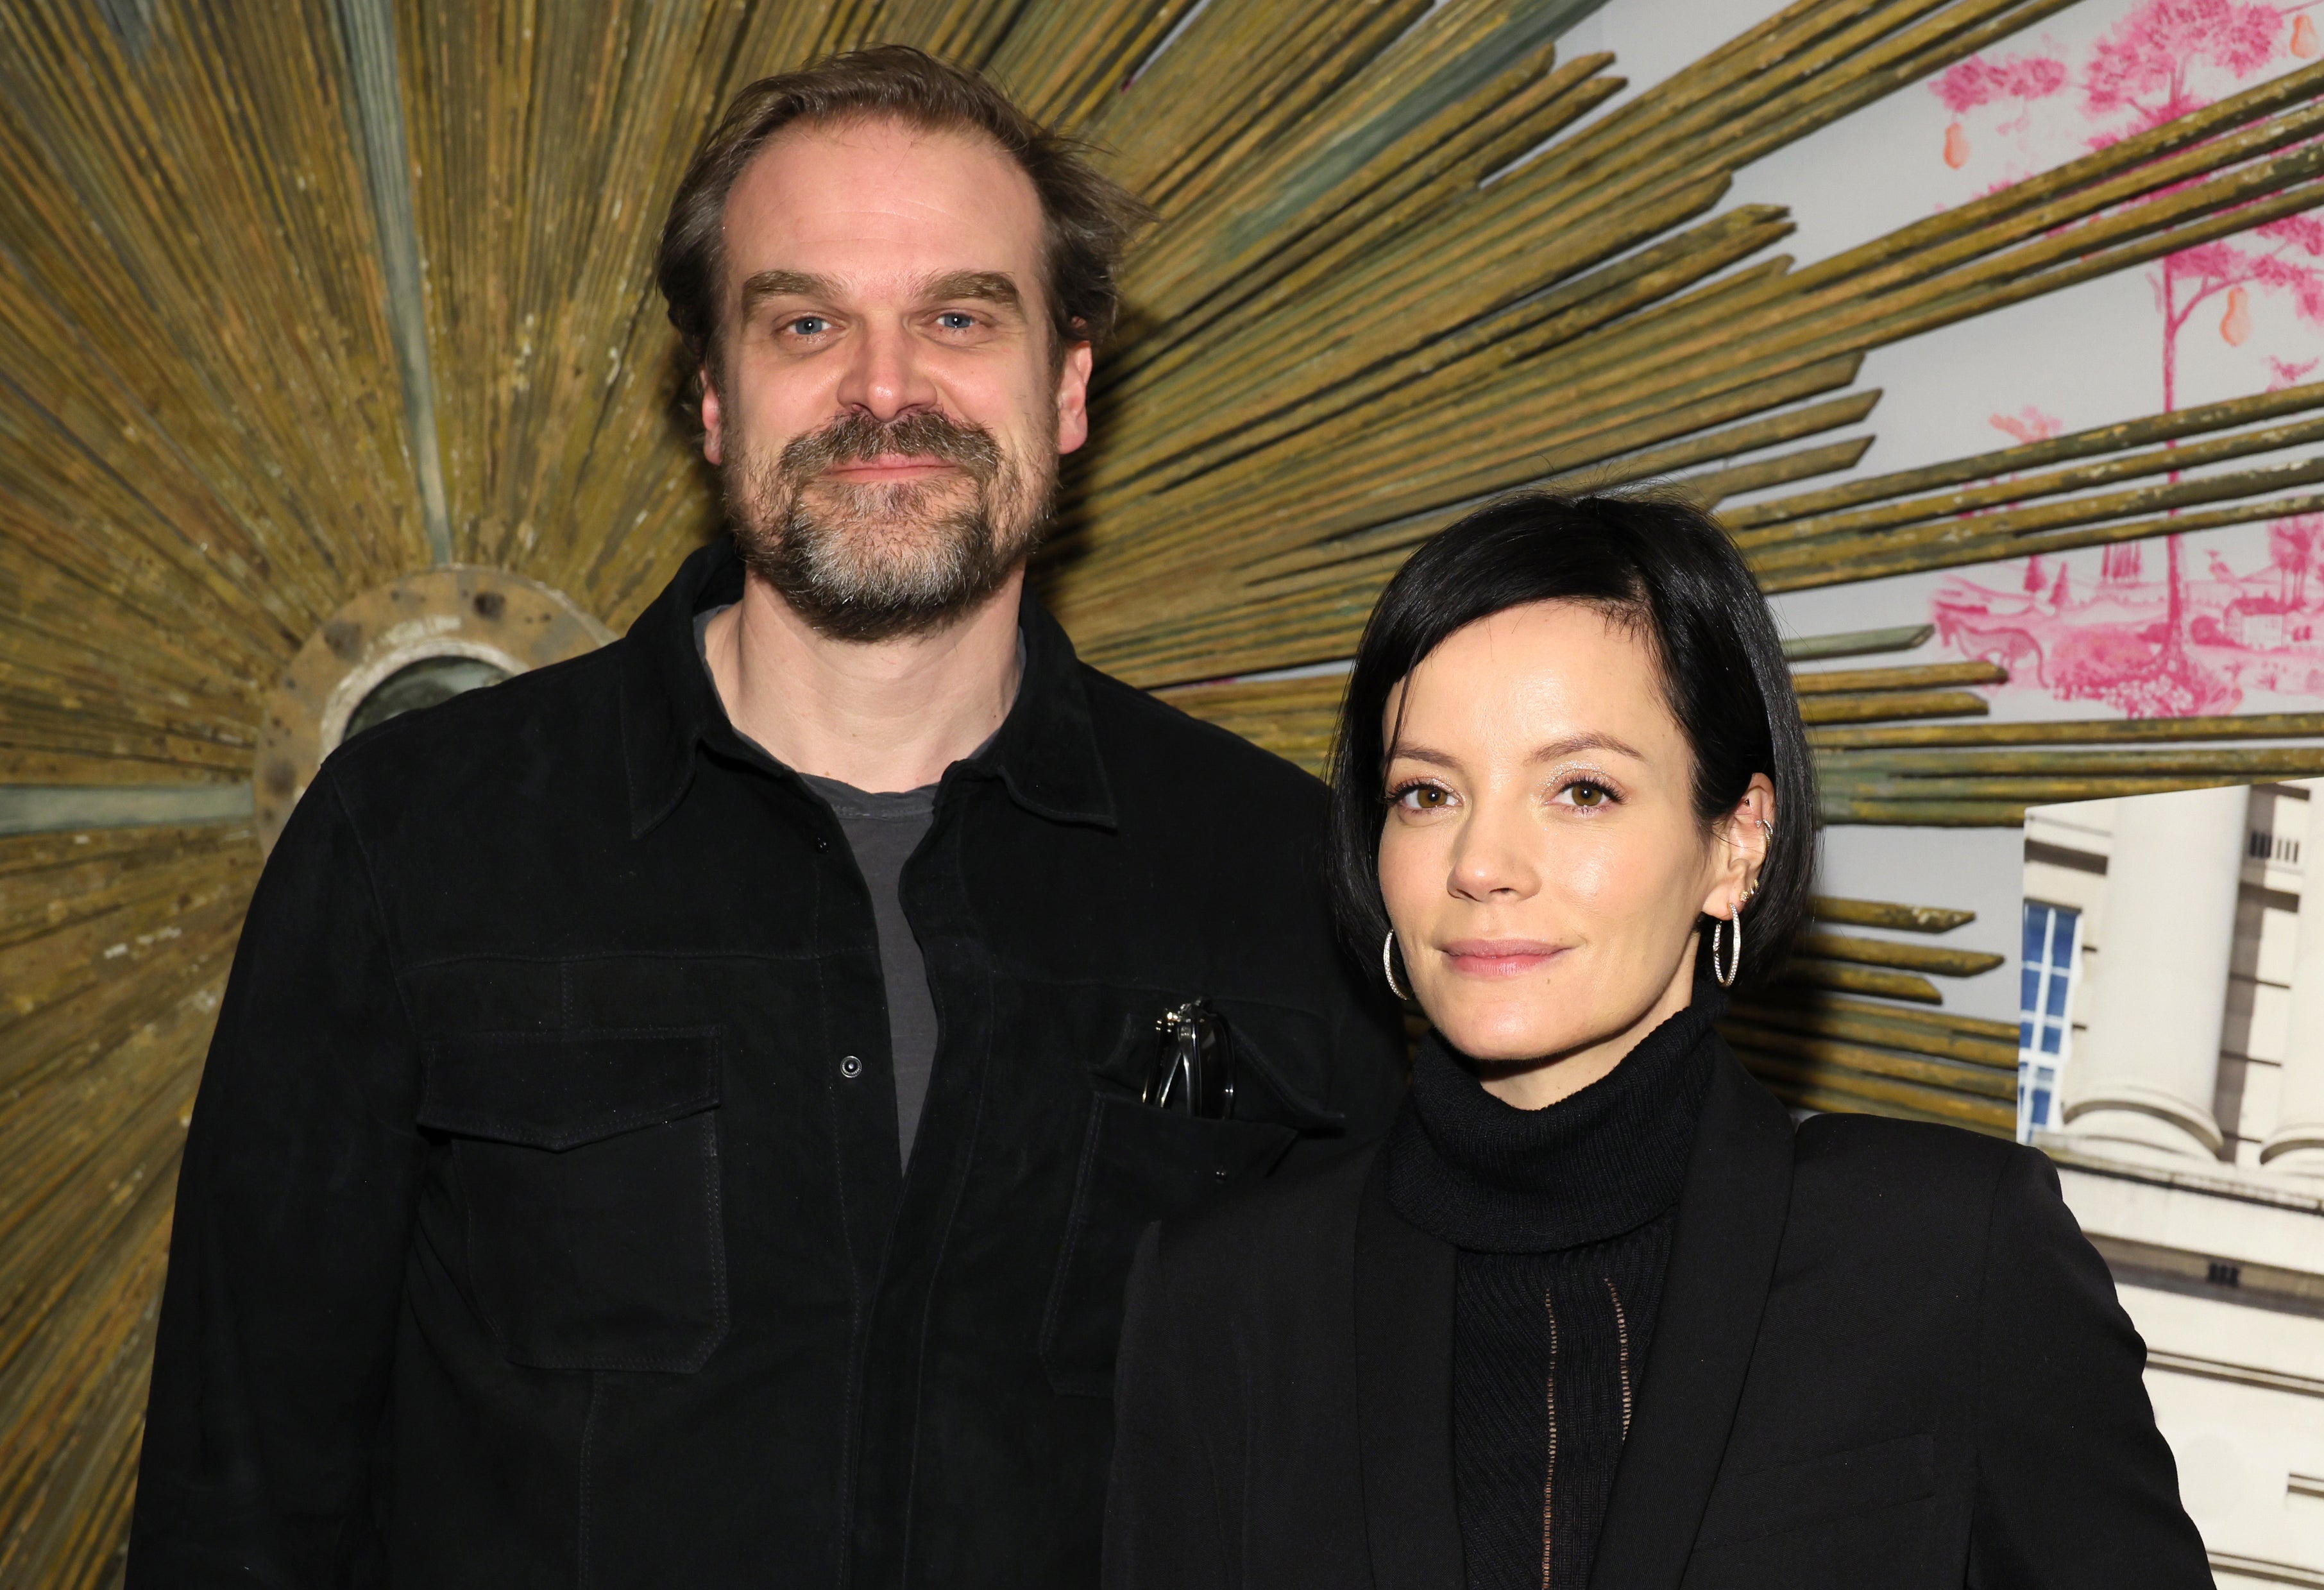 Lily Allen and David Harbour on the red carpet